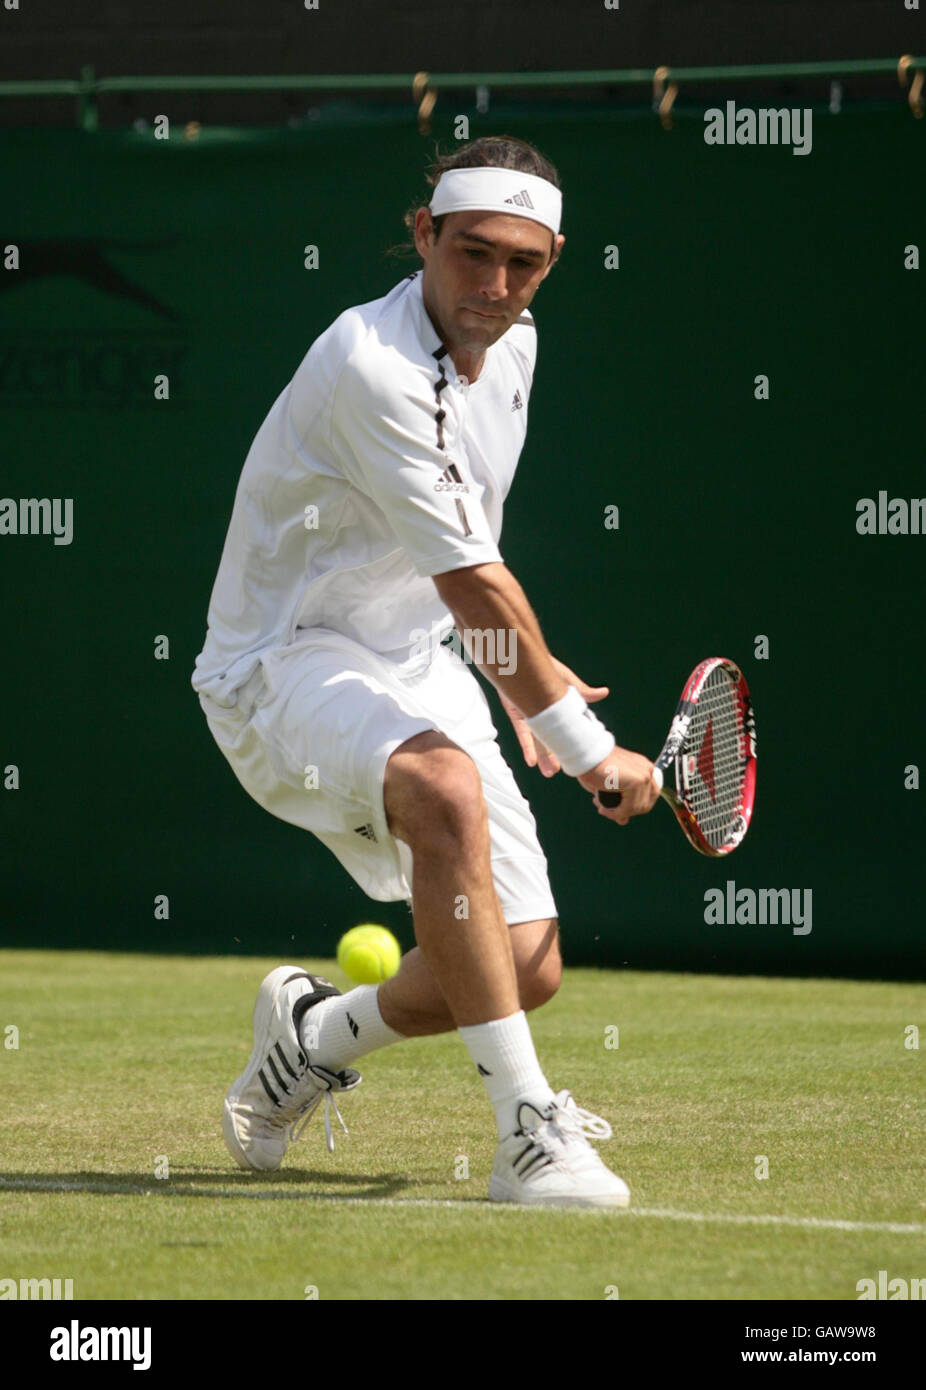 Cyprus's Marcos Baghdatis in action during the Wimbledon Championships 2008 at the All England Tennis Club in Wimbledon. Stock Photo